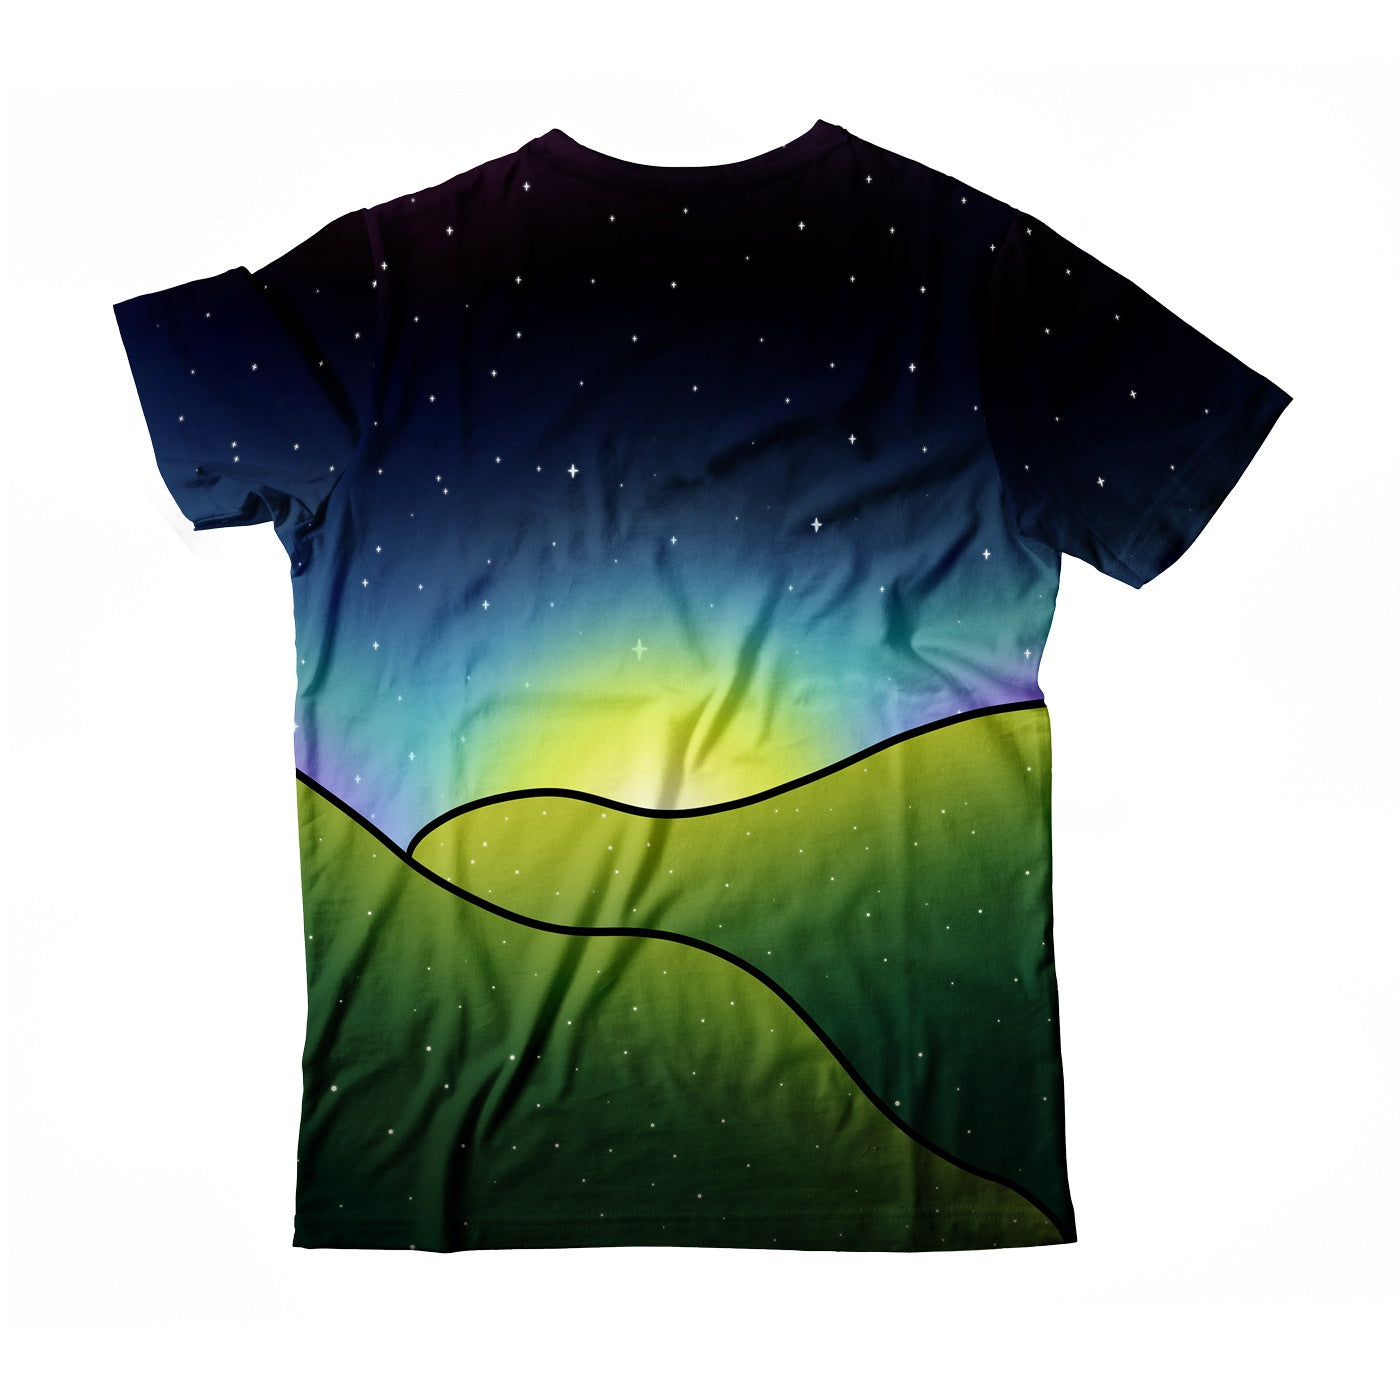 Psychedelic Dream T-Shirt